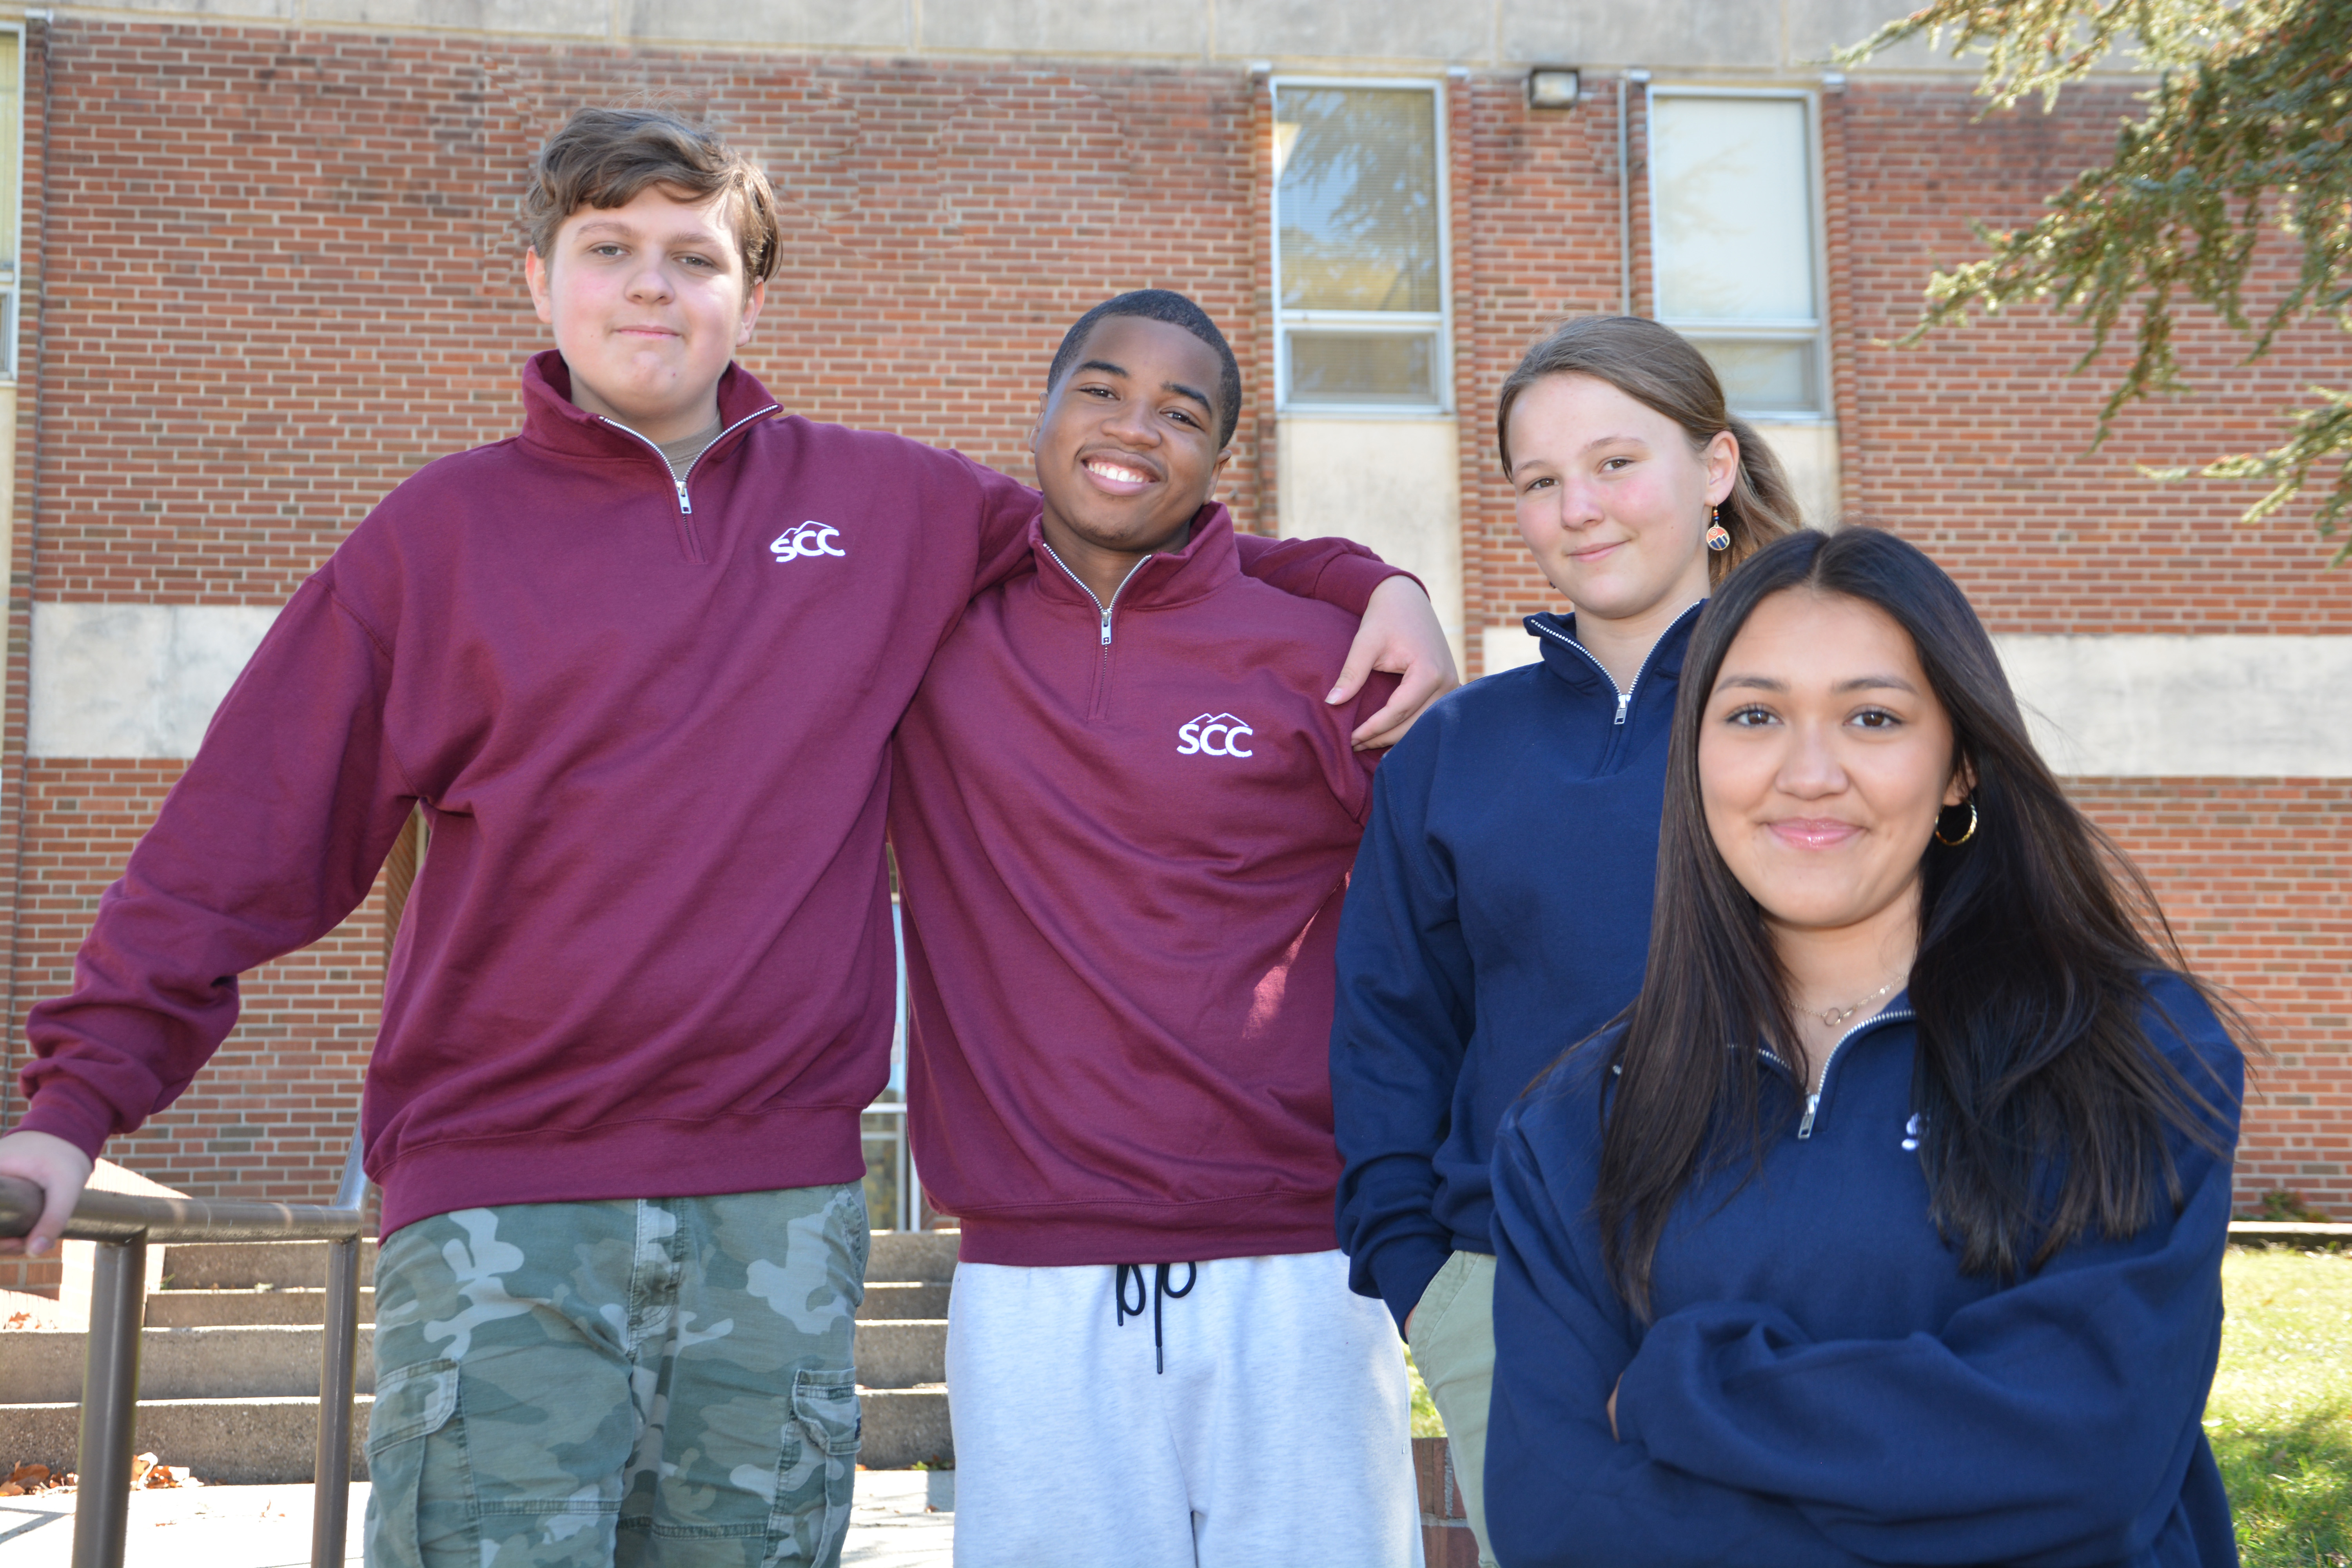 Current JCEC students pose for a photo earlier this month on SCC’s Jackson Campus in Sylva. From left are Christian Simmons, Willie Knight, Lurae Mackey and Lucia Romero.